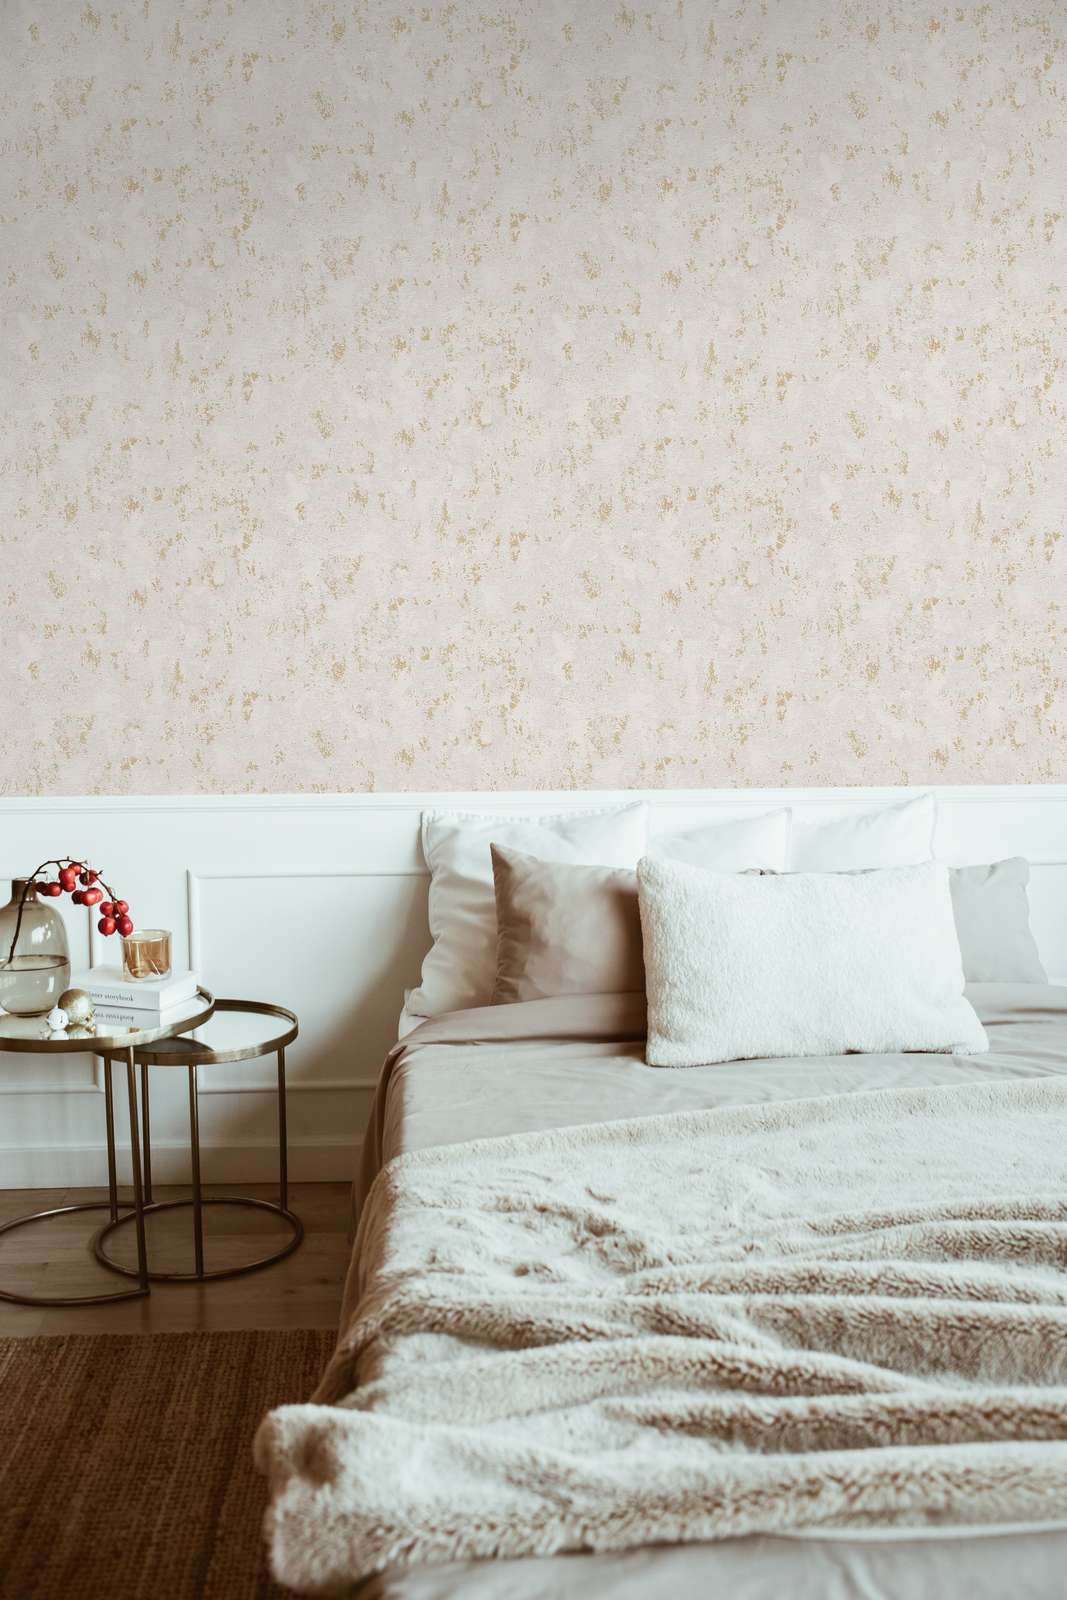             Non-woven wallpaper in plaster look with gold accents - beige, grey, gold
        